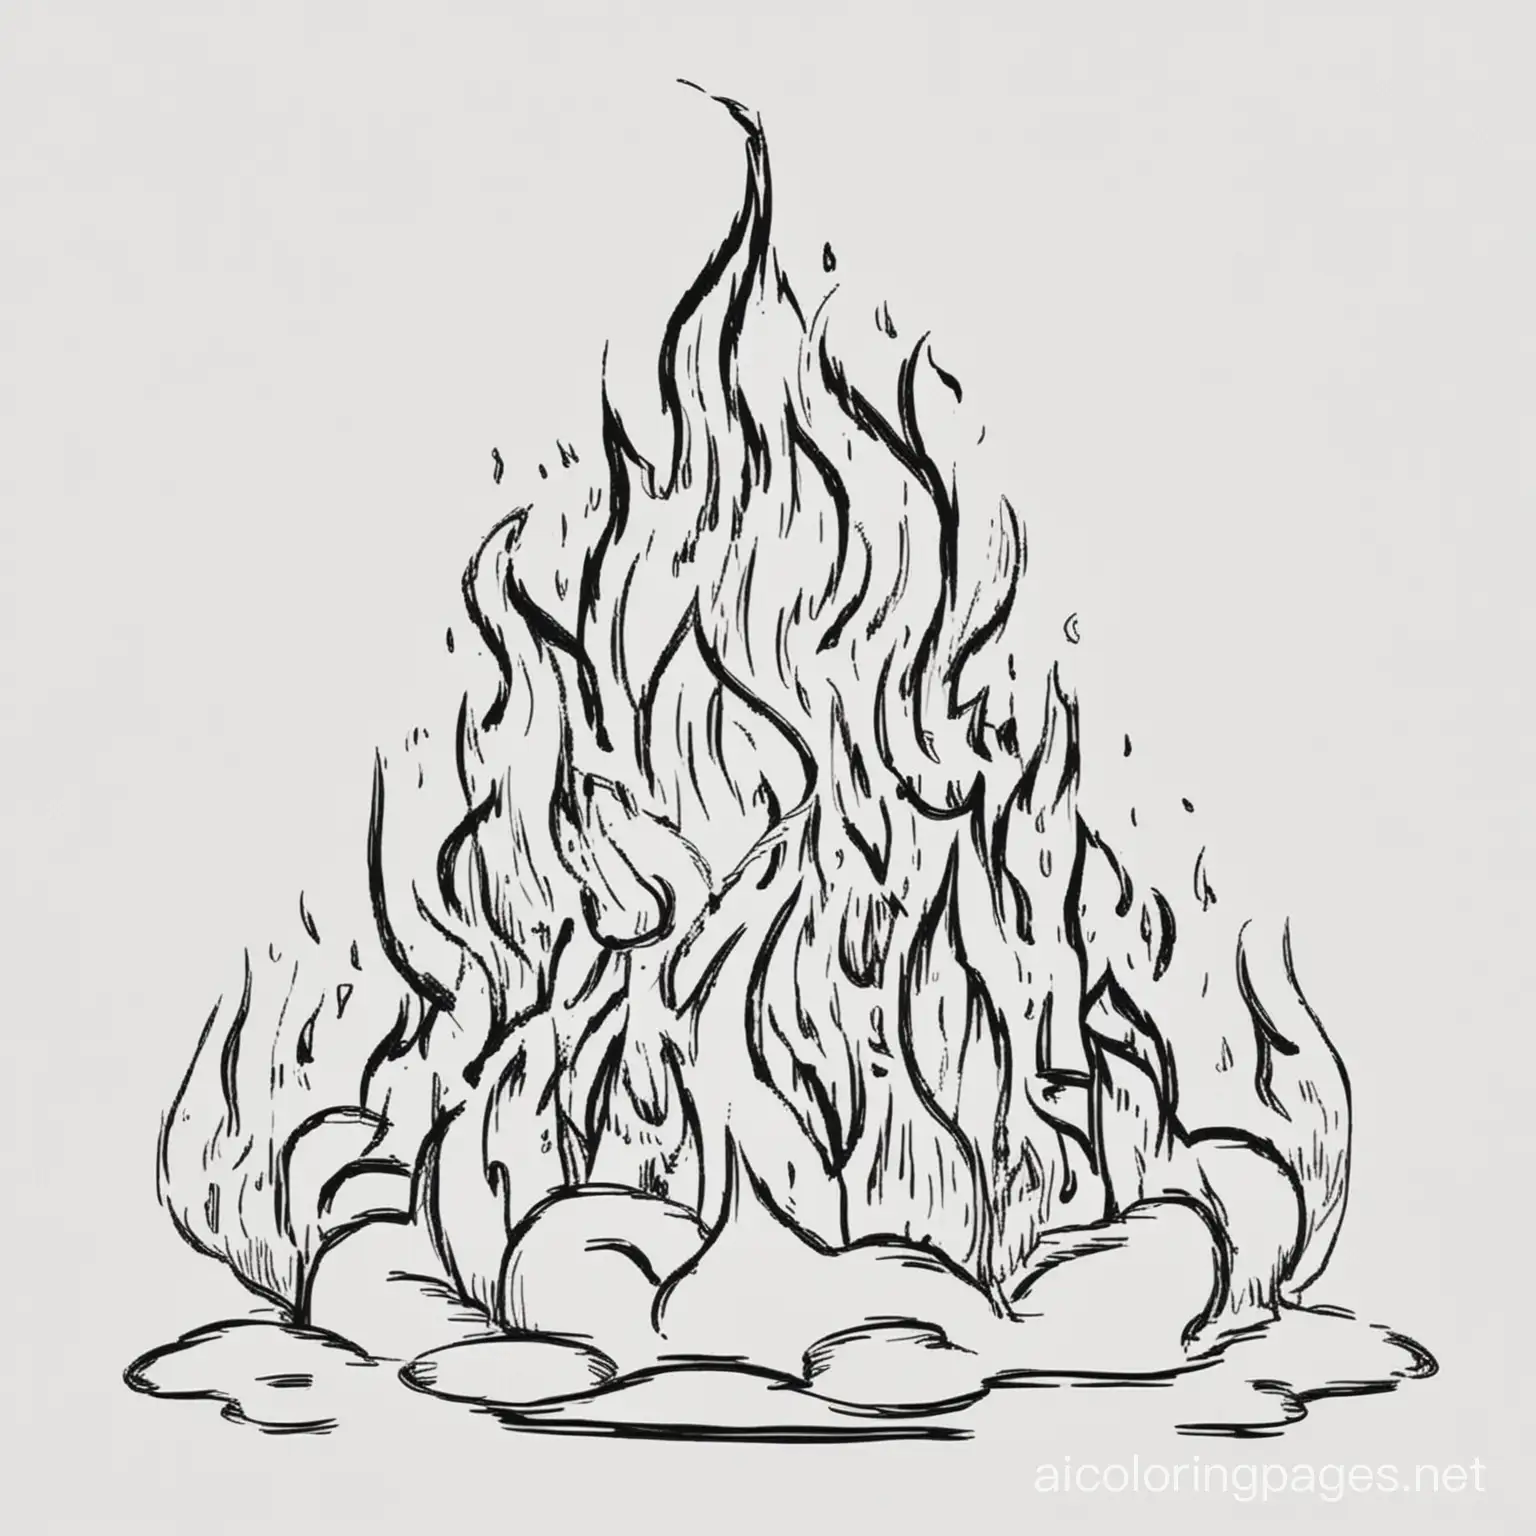 Childrens-Coloring-Page-Fire-Tornado-Coloring-Activity-for-Kids